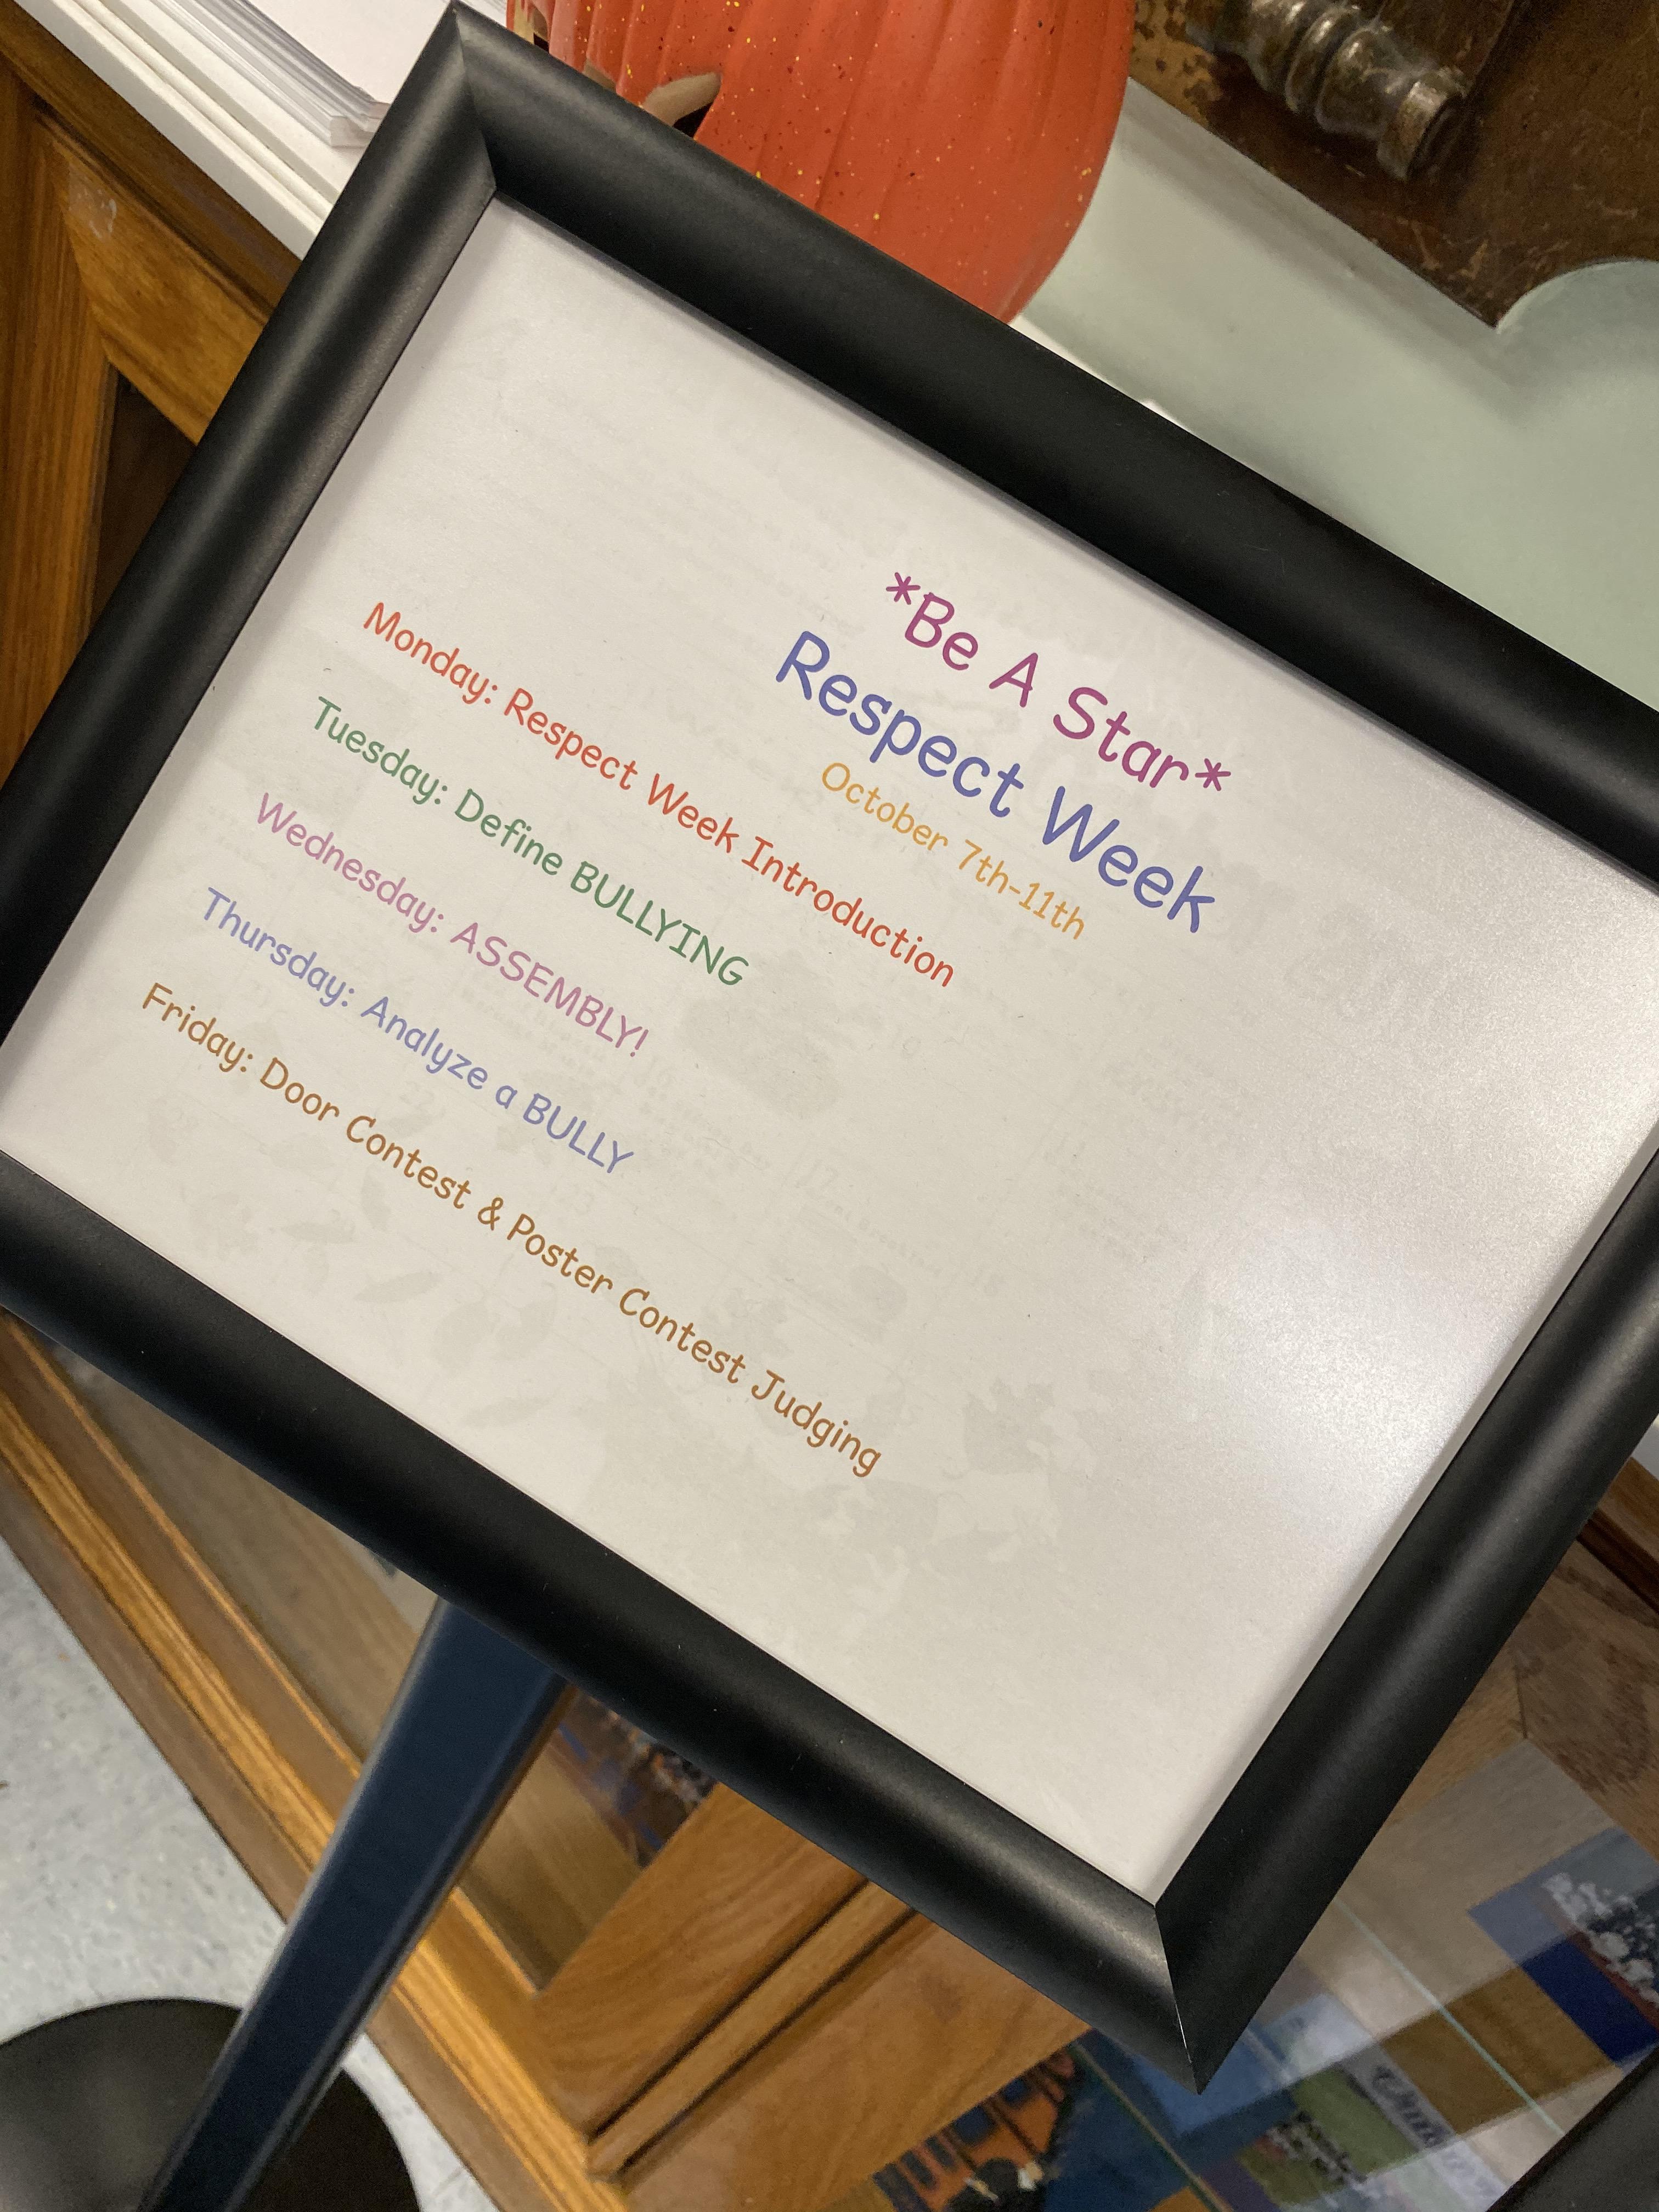 Week of Respect Theme poster